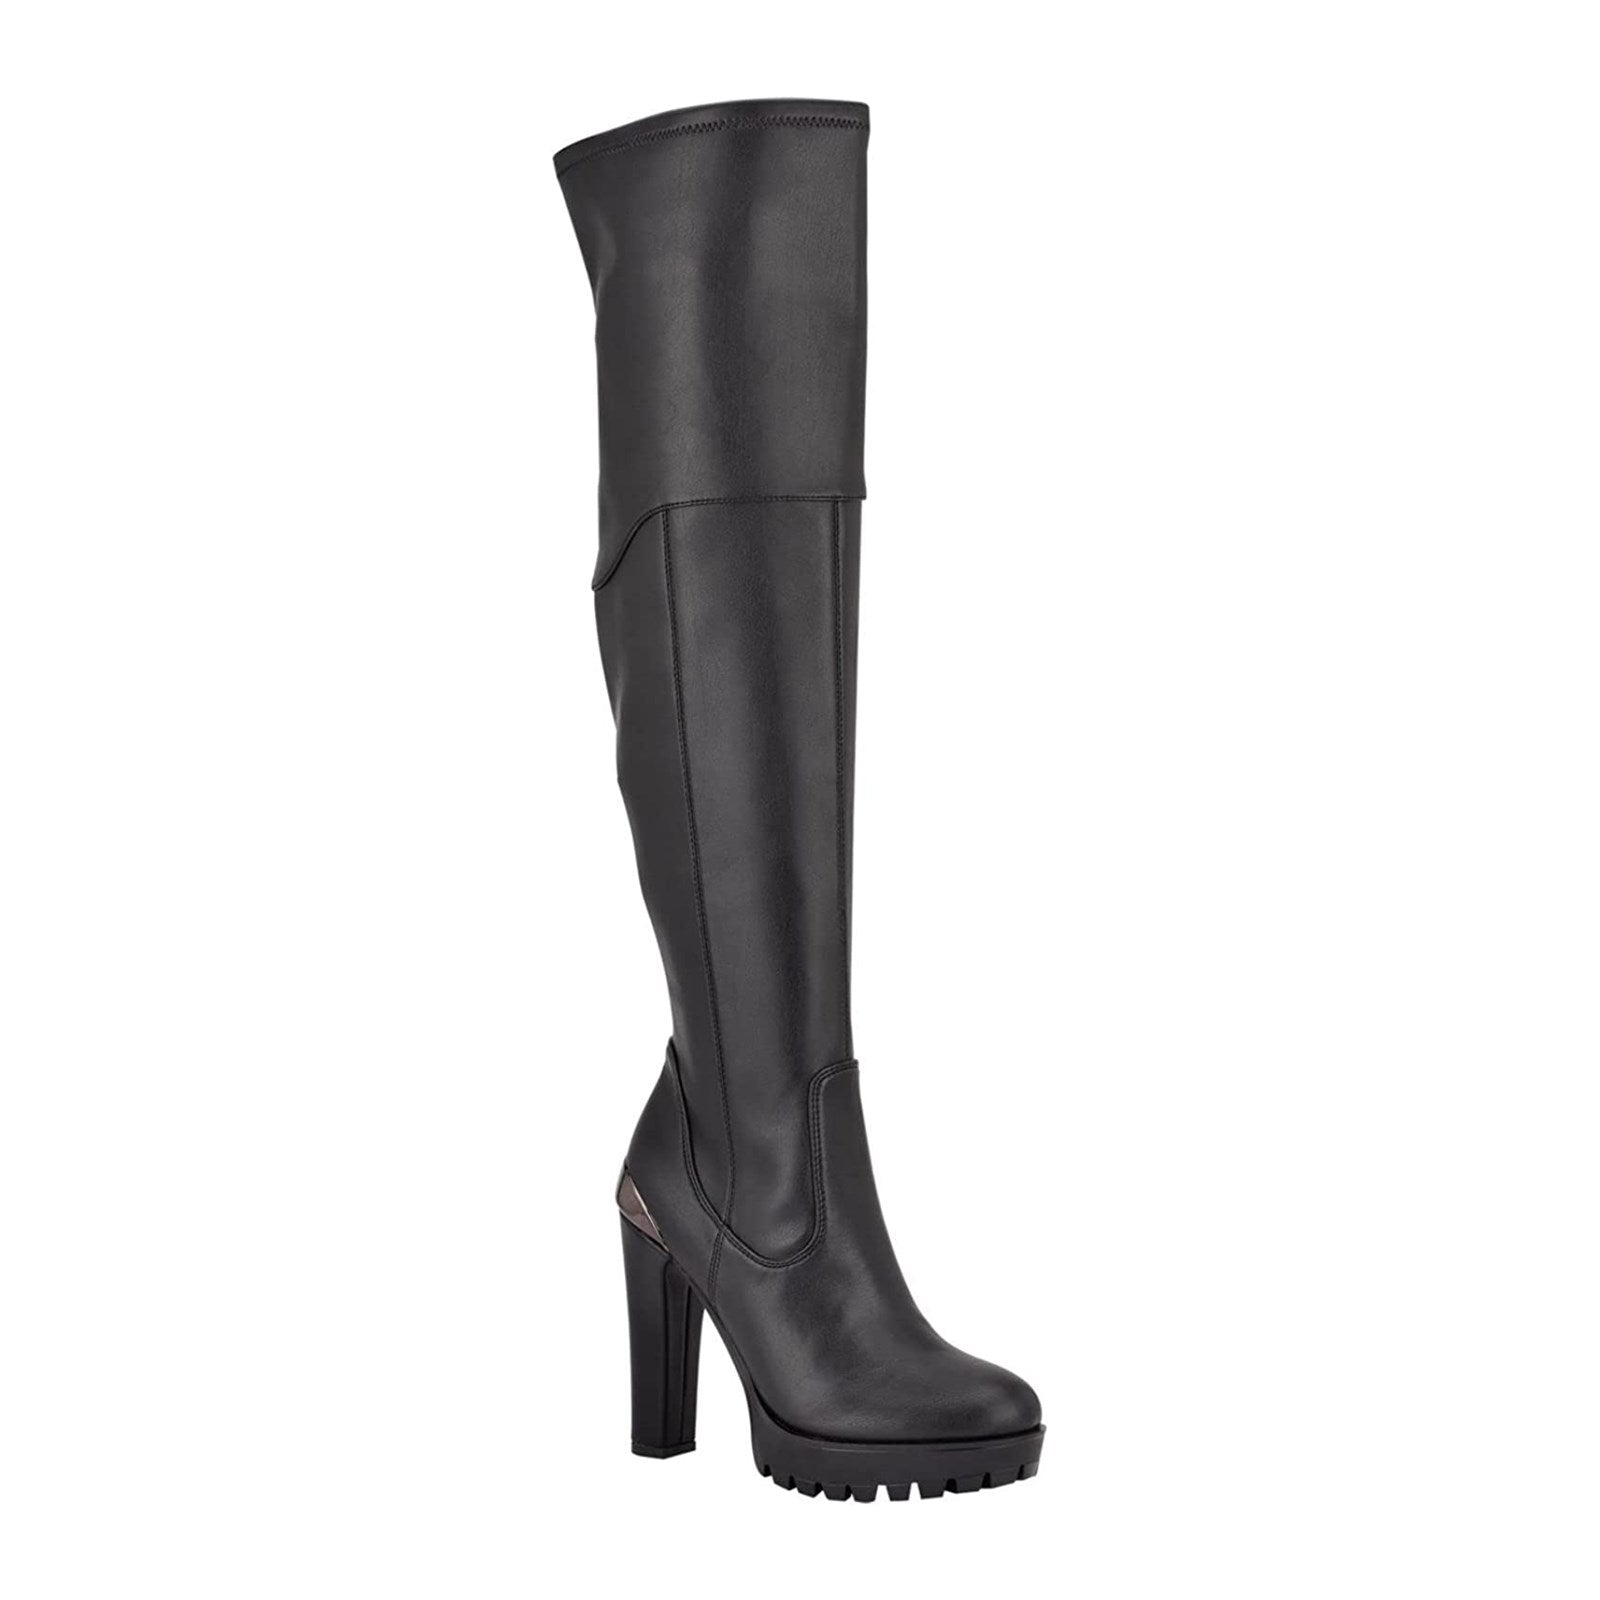 Guess Women Taylin Over The Knee Heel Boots